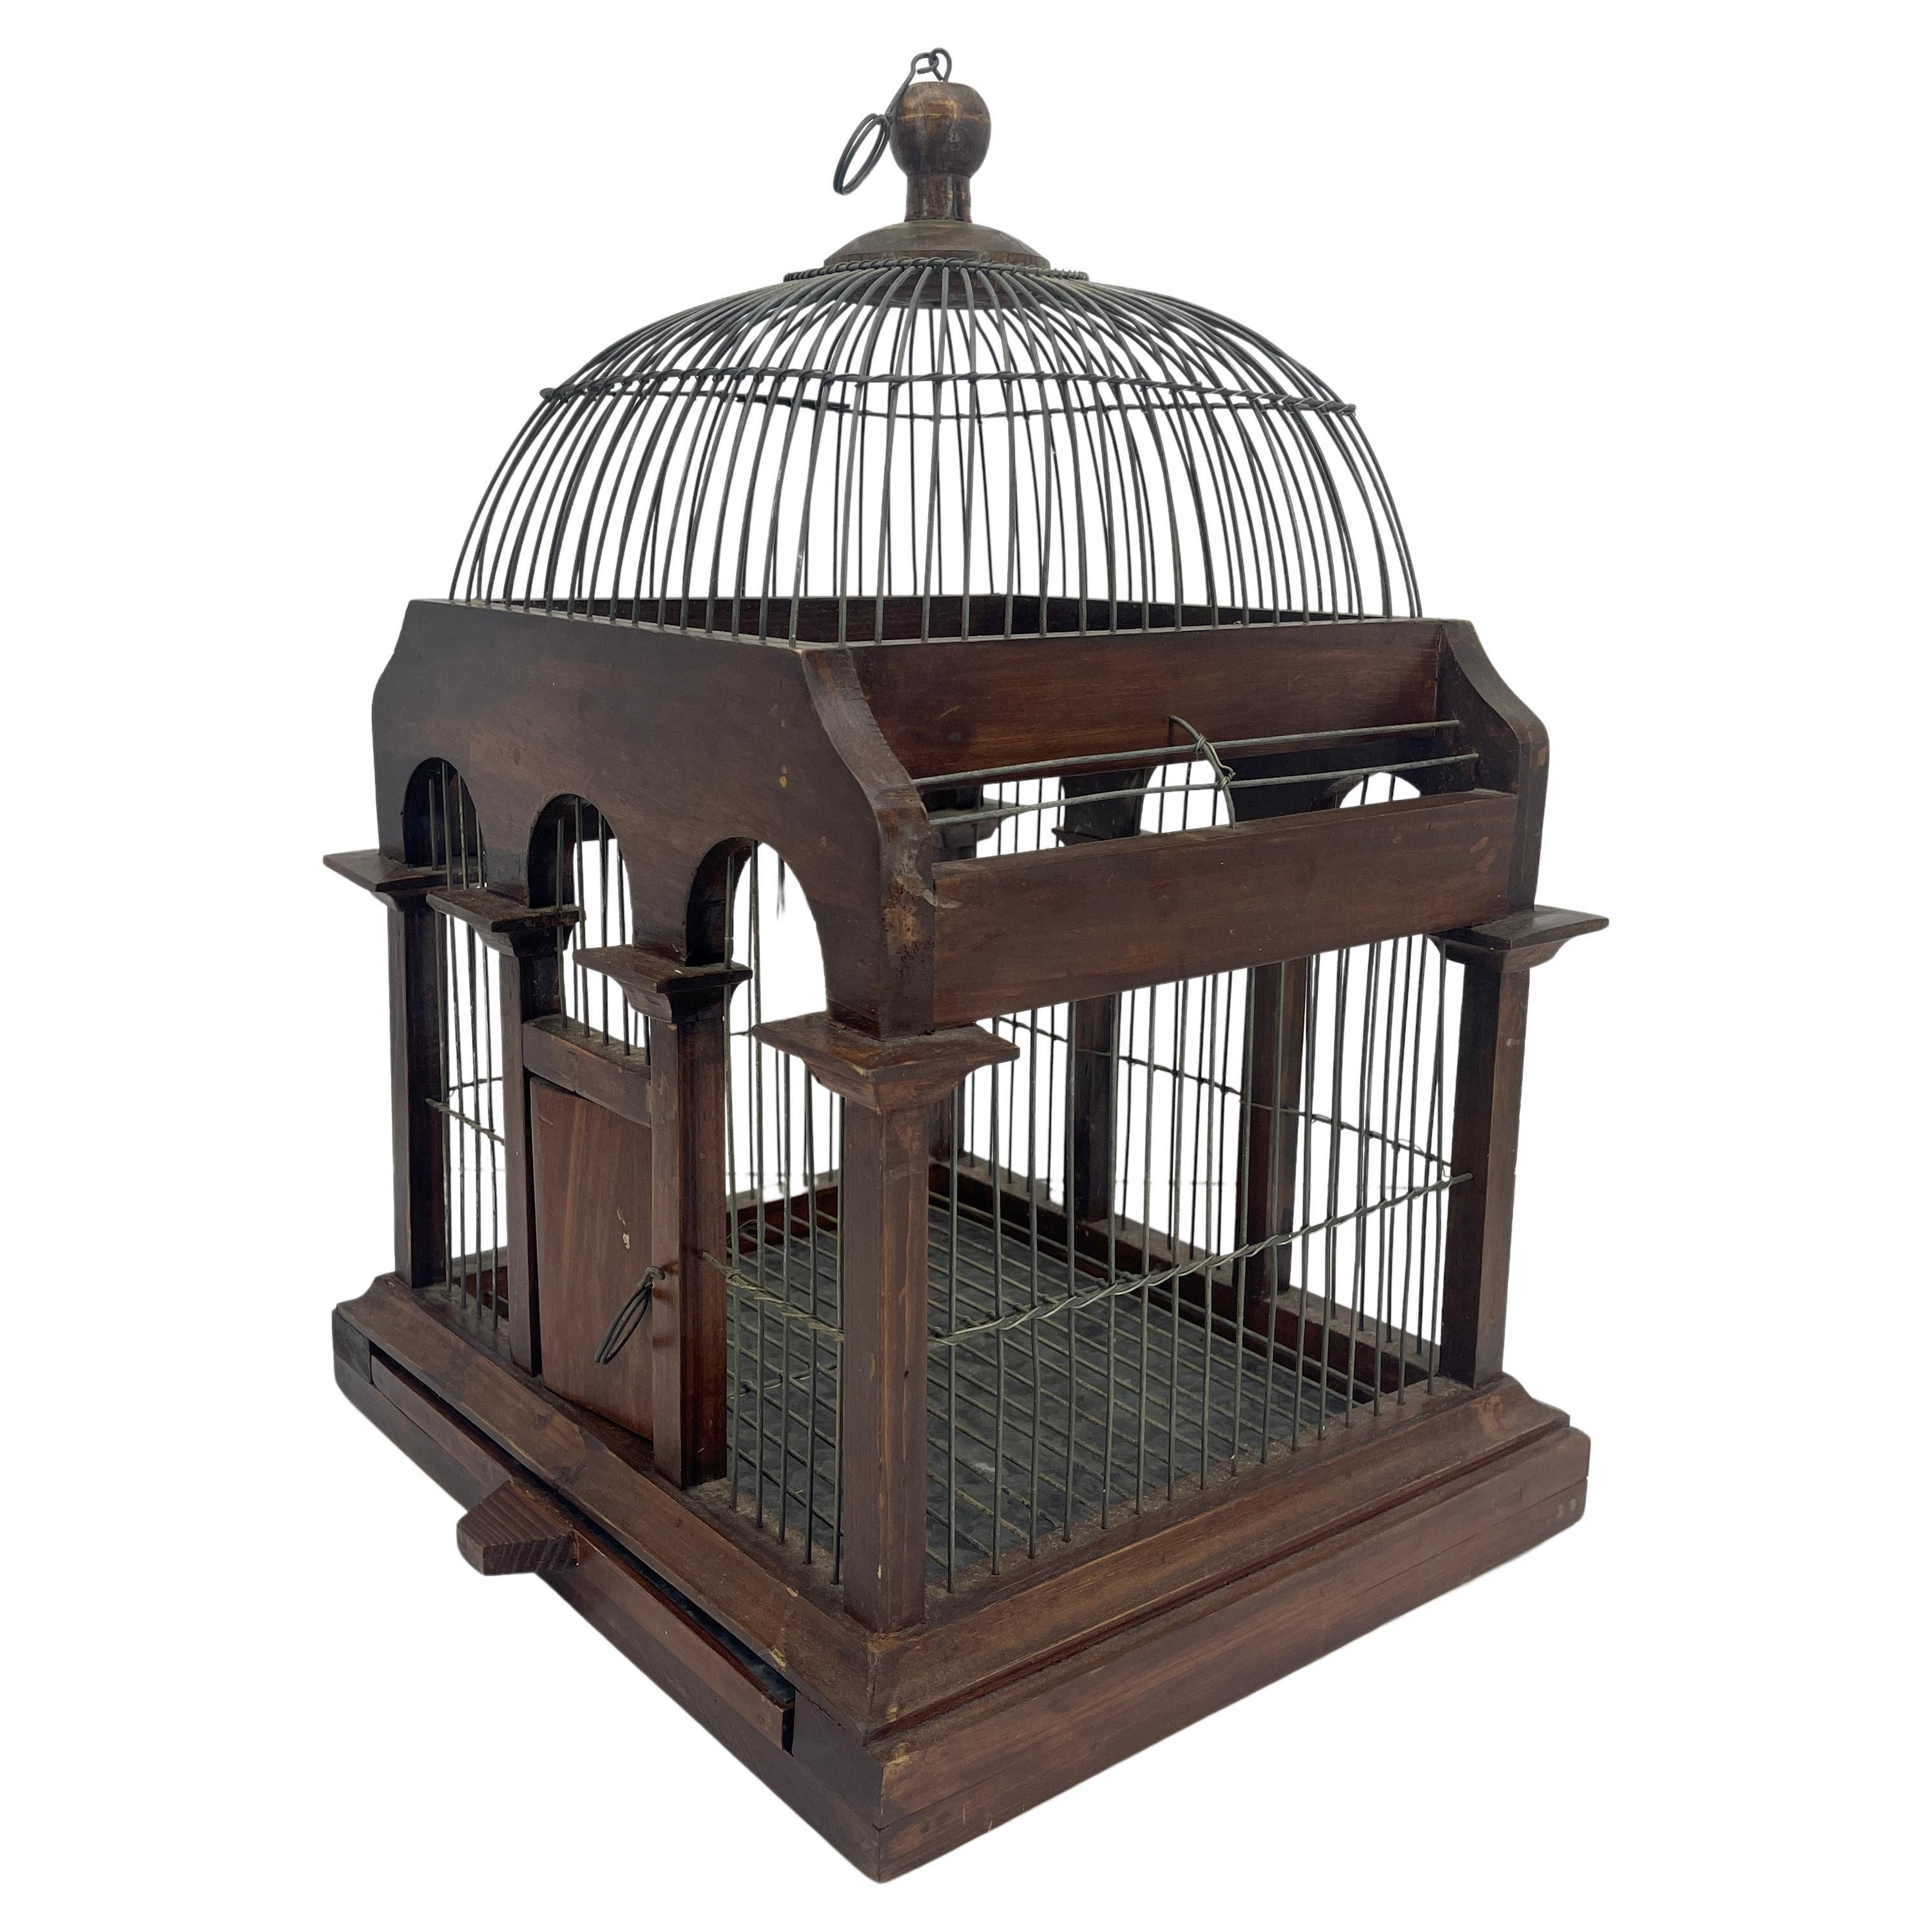 Small rectangular Italian bird cage as an architectural dome building with columns, front door and metal tray.